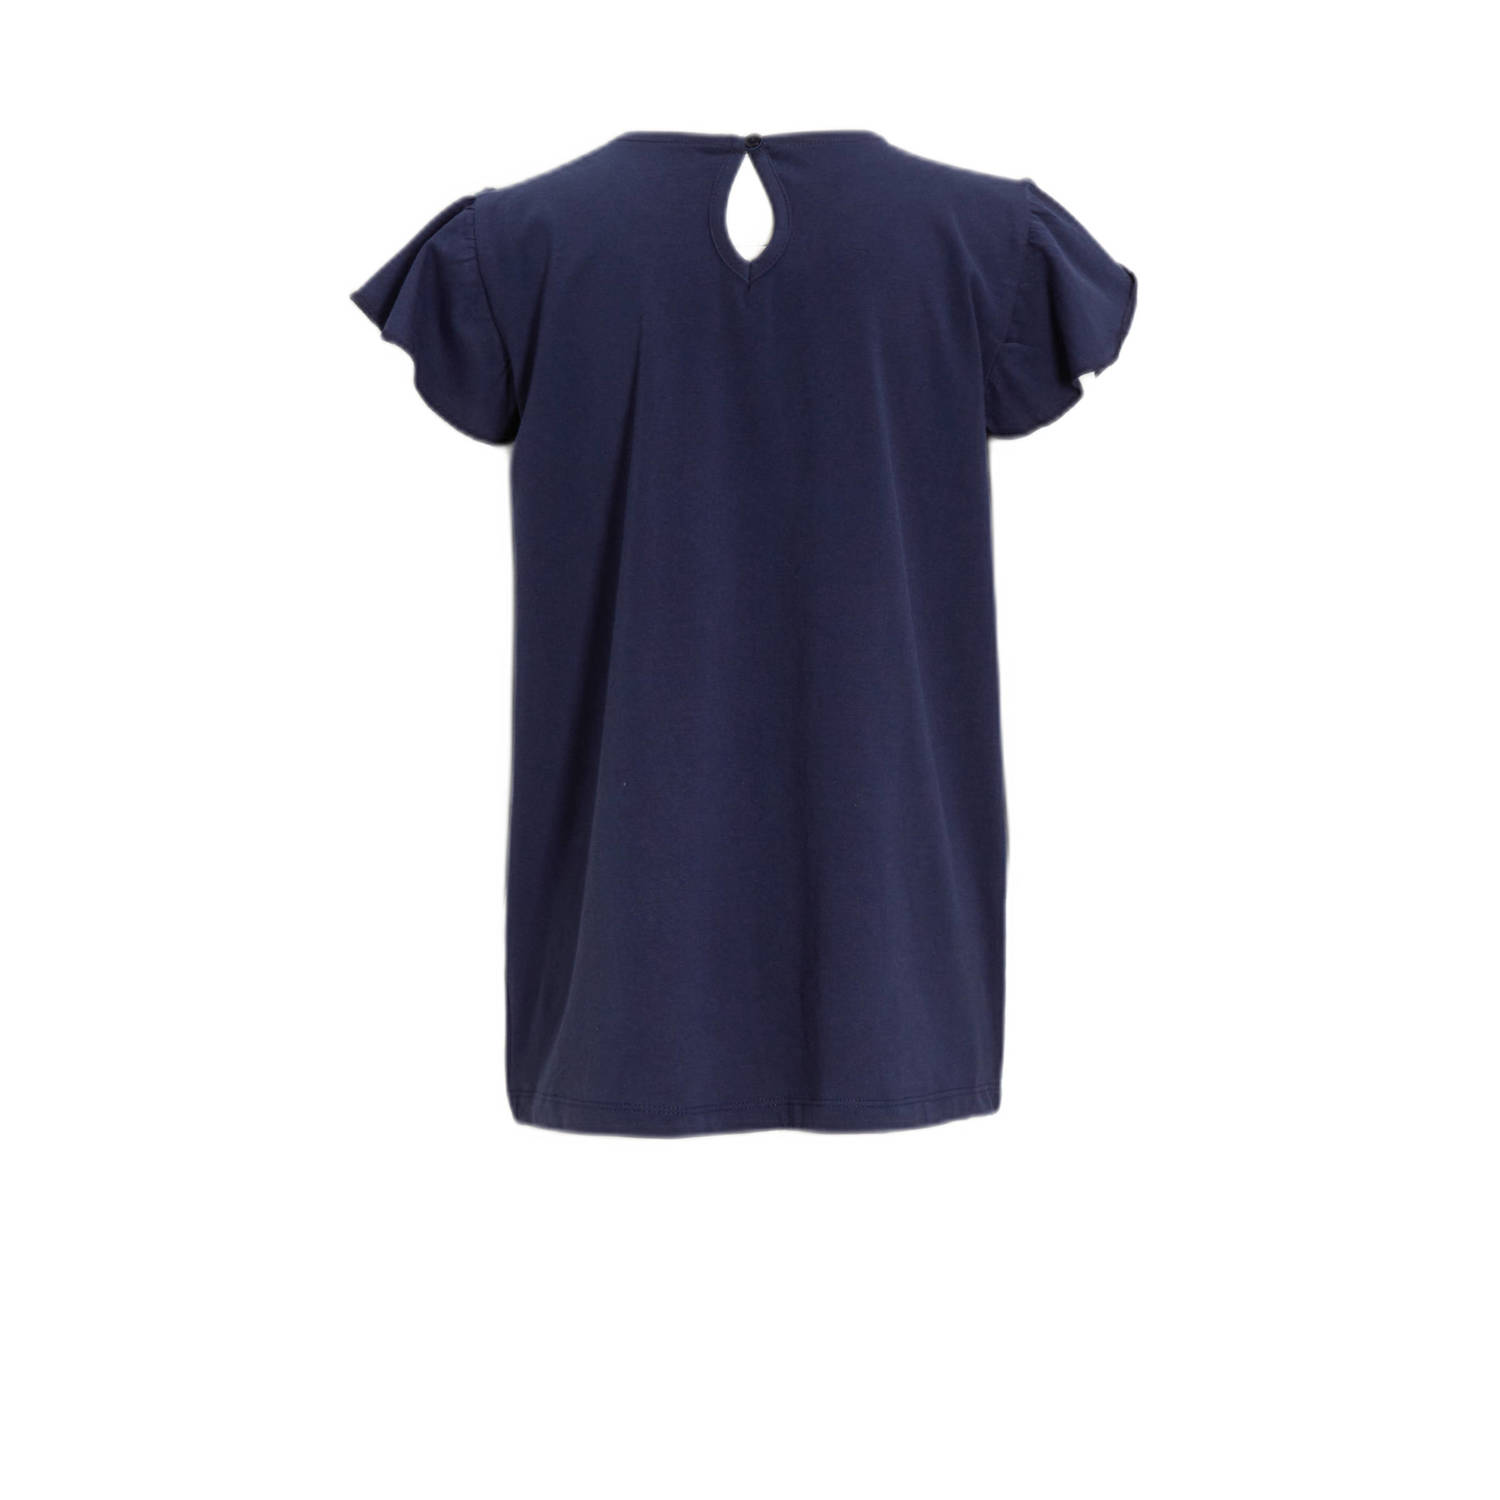 anytime T-shirt met broderie donkerblauw